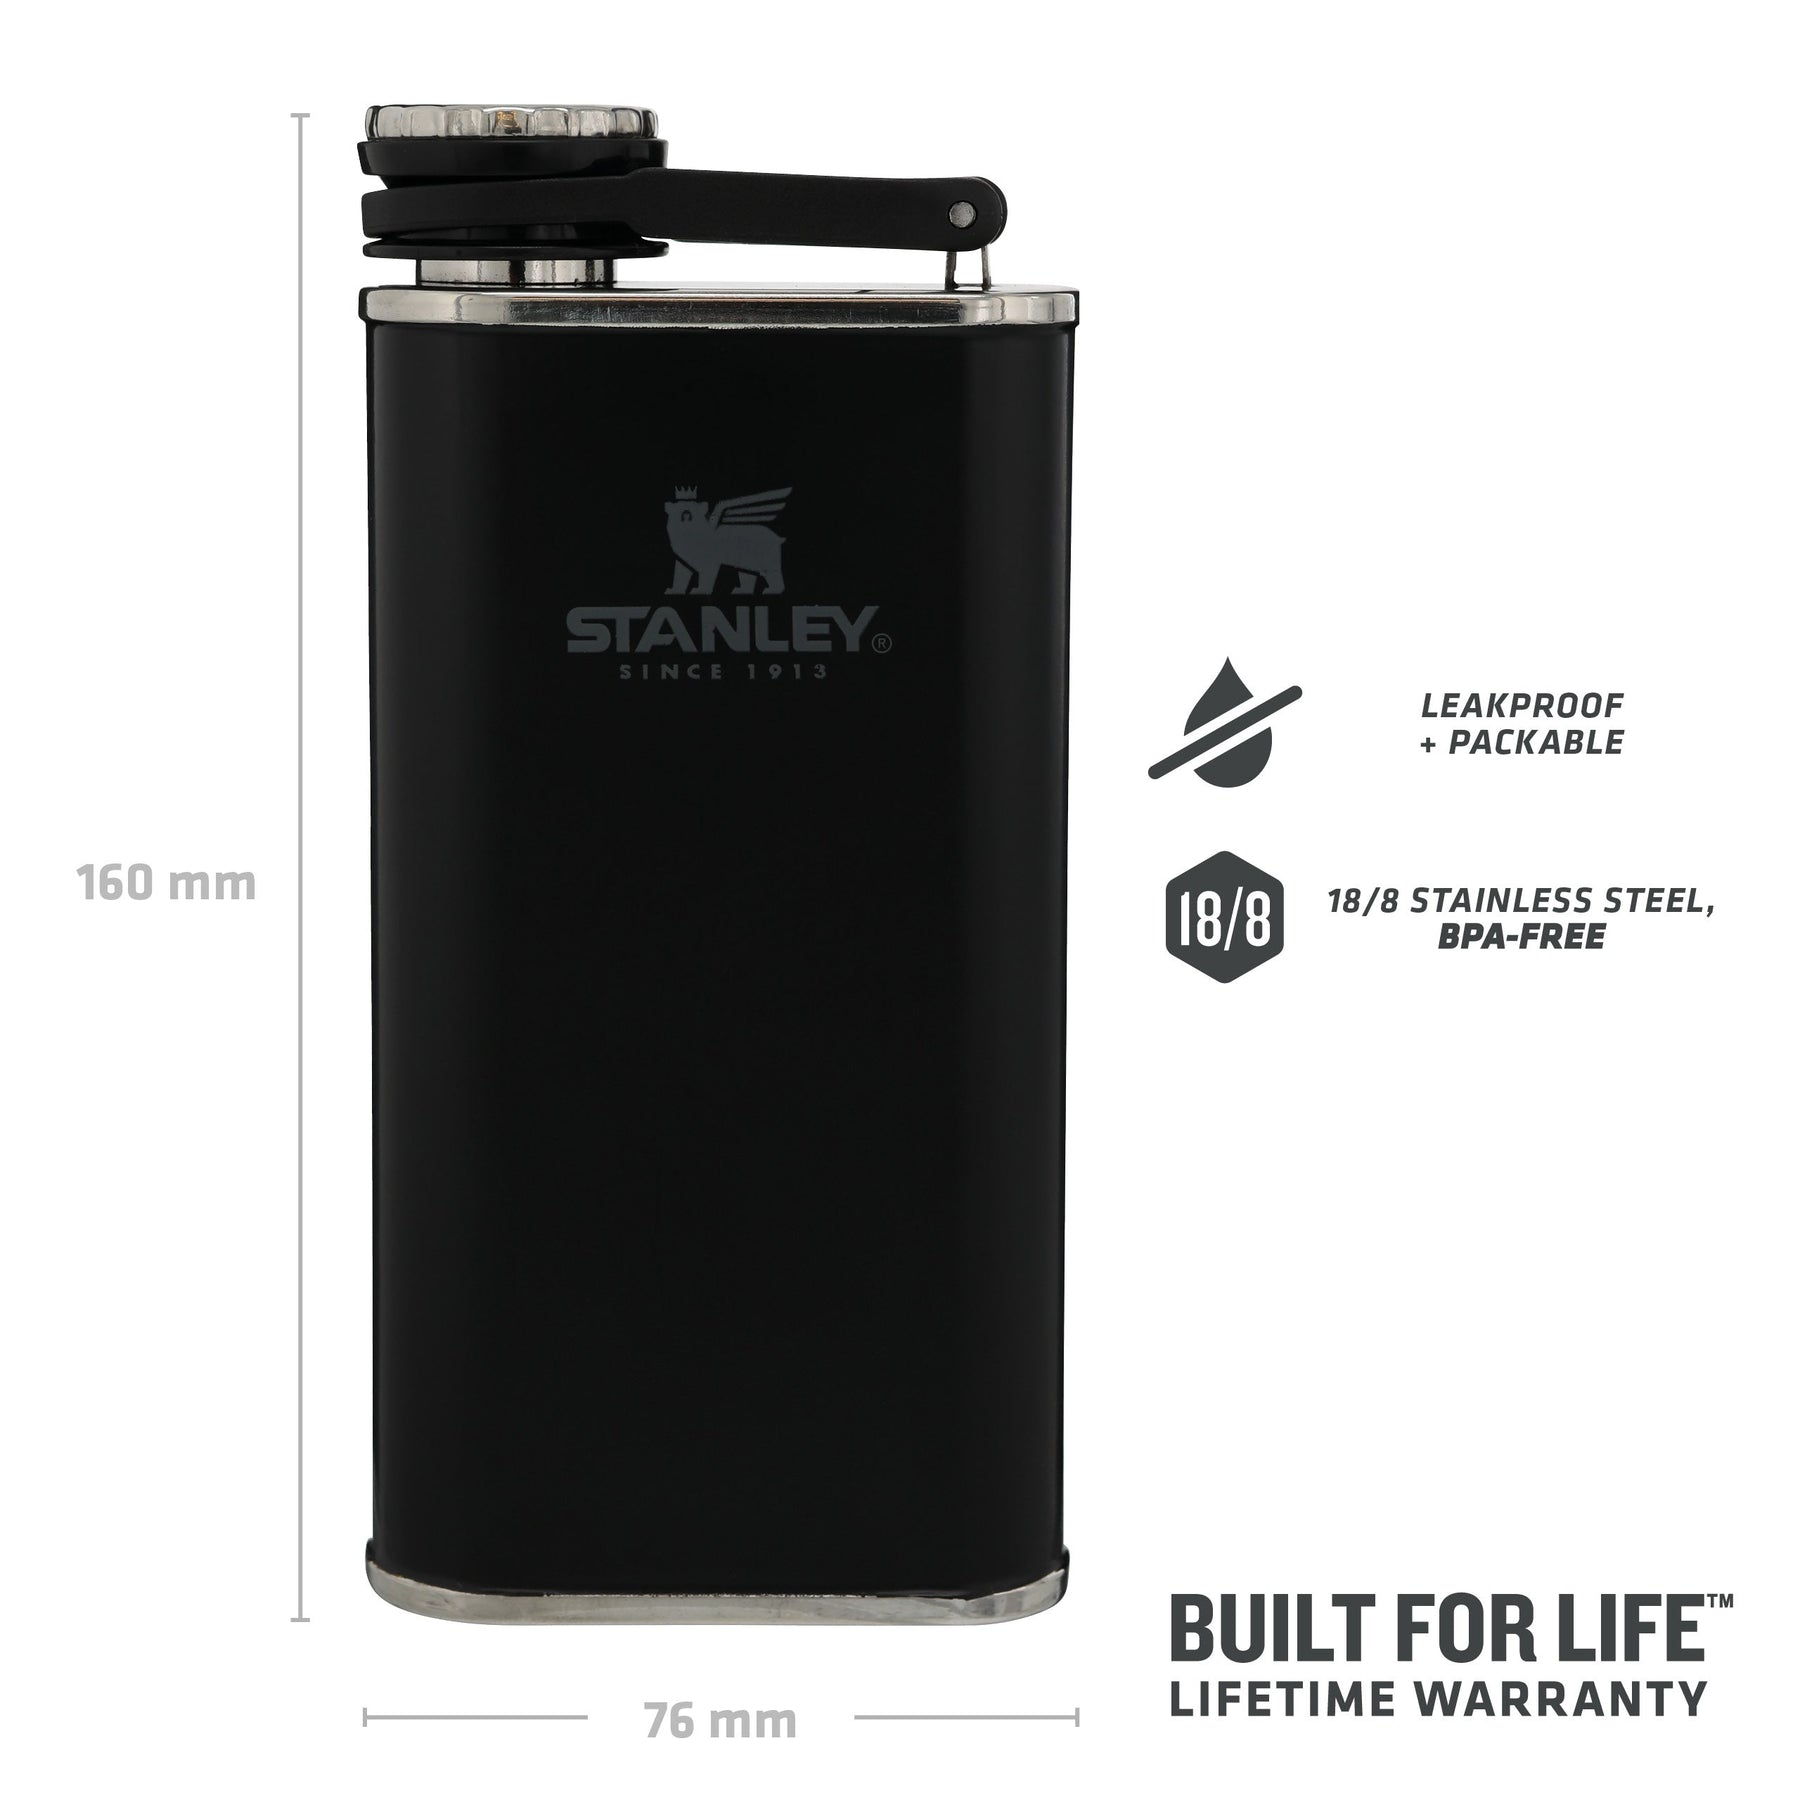 Stanley The Easy Fill Wide Mouth Flask 230 ml, dark blue, hip flask